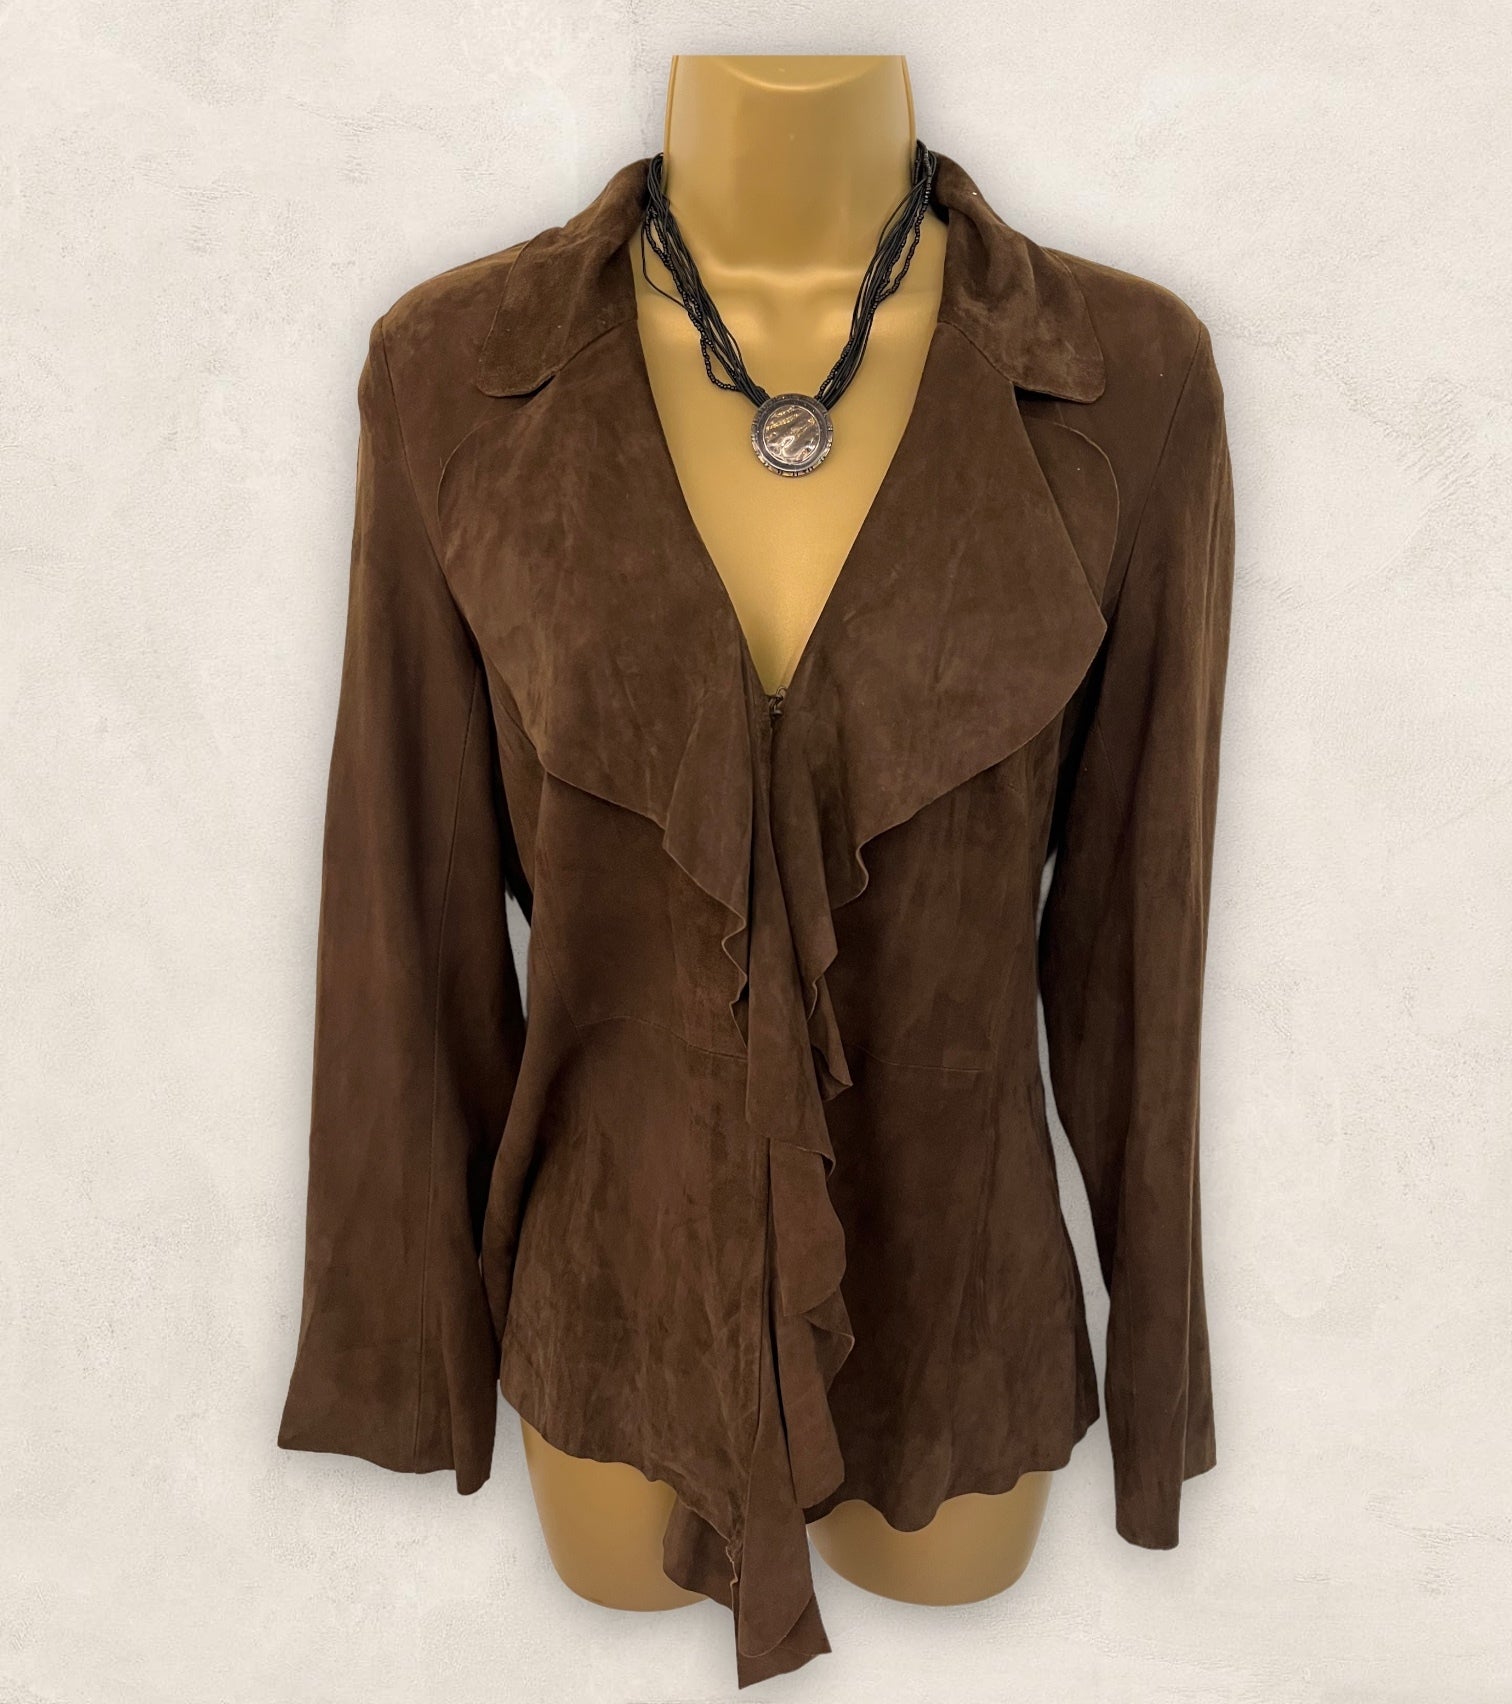 CN Vintage Butter Soft Chocolate Suede Jacket Size XS Approx UK 12 US 8 EU 40 Timeless Fashions